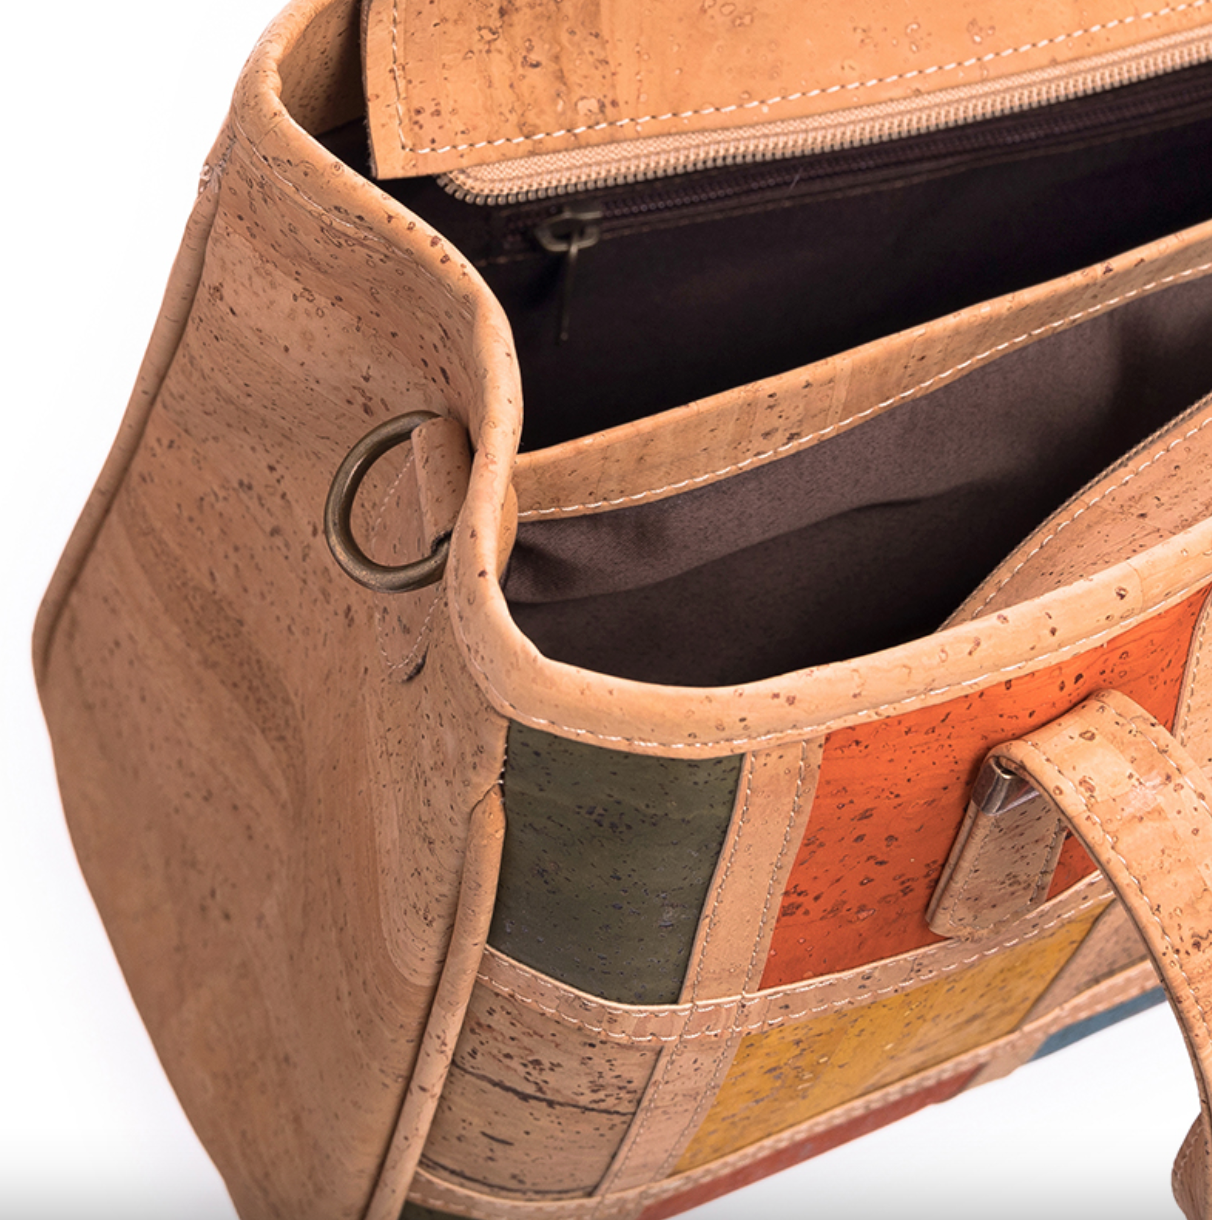 Ethical Cork Handbag Perfect for Casual and Formal Occasions Diversity